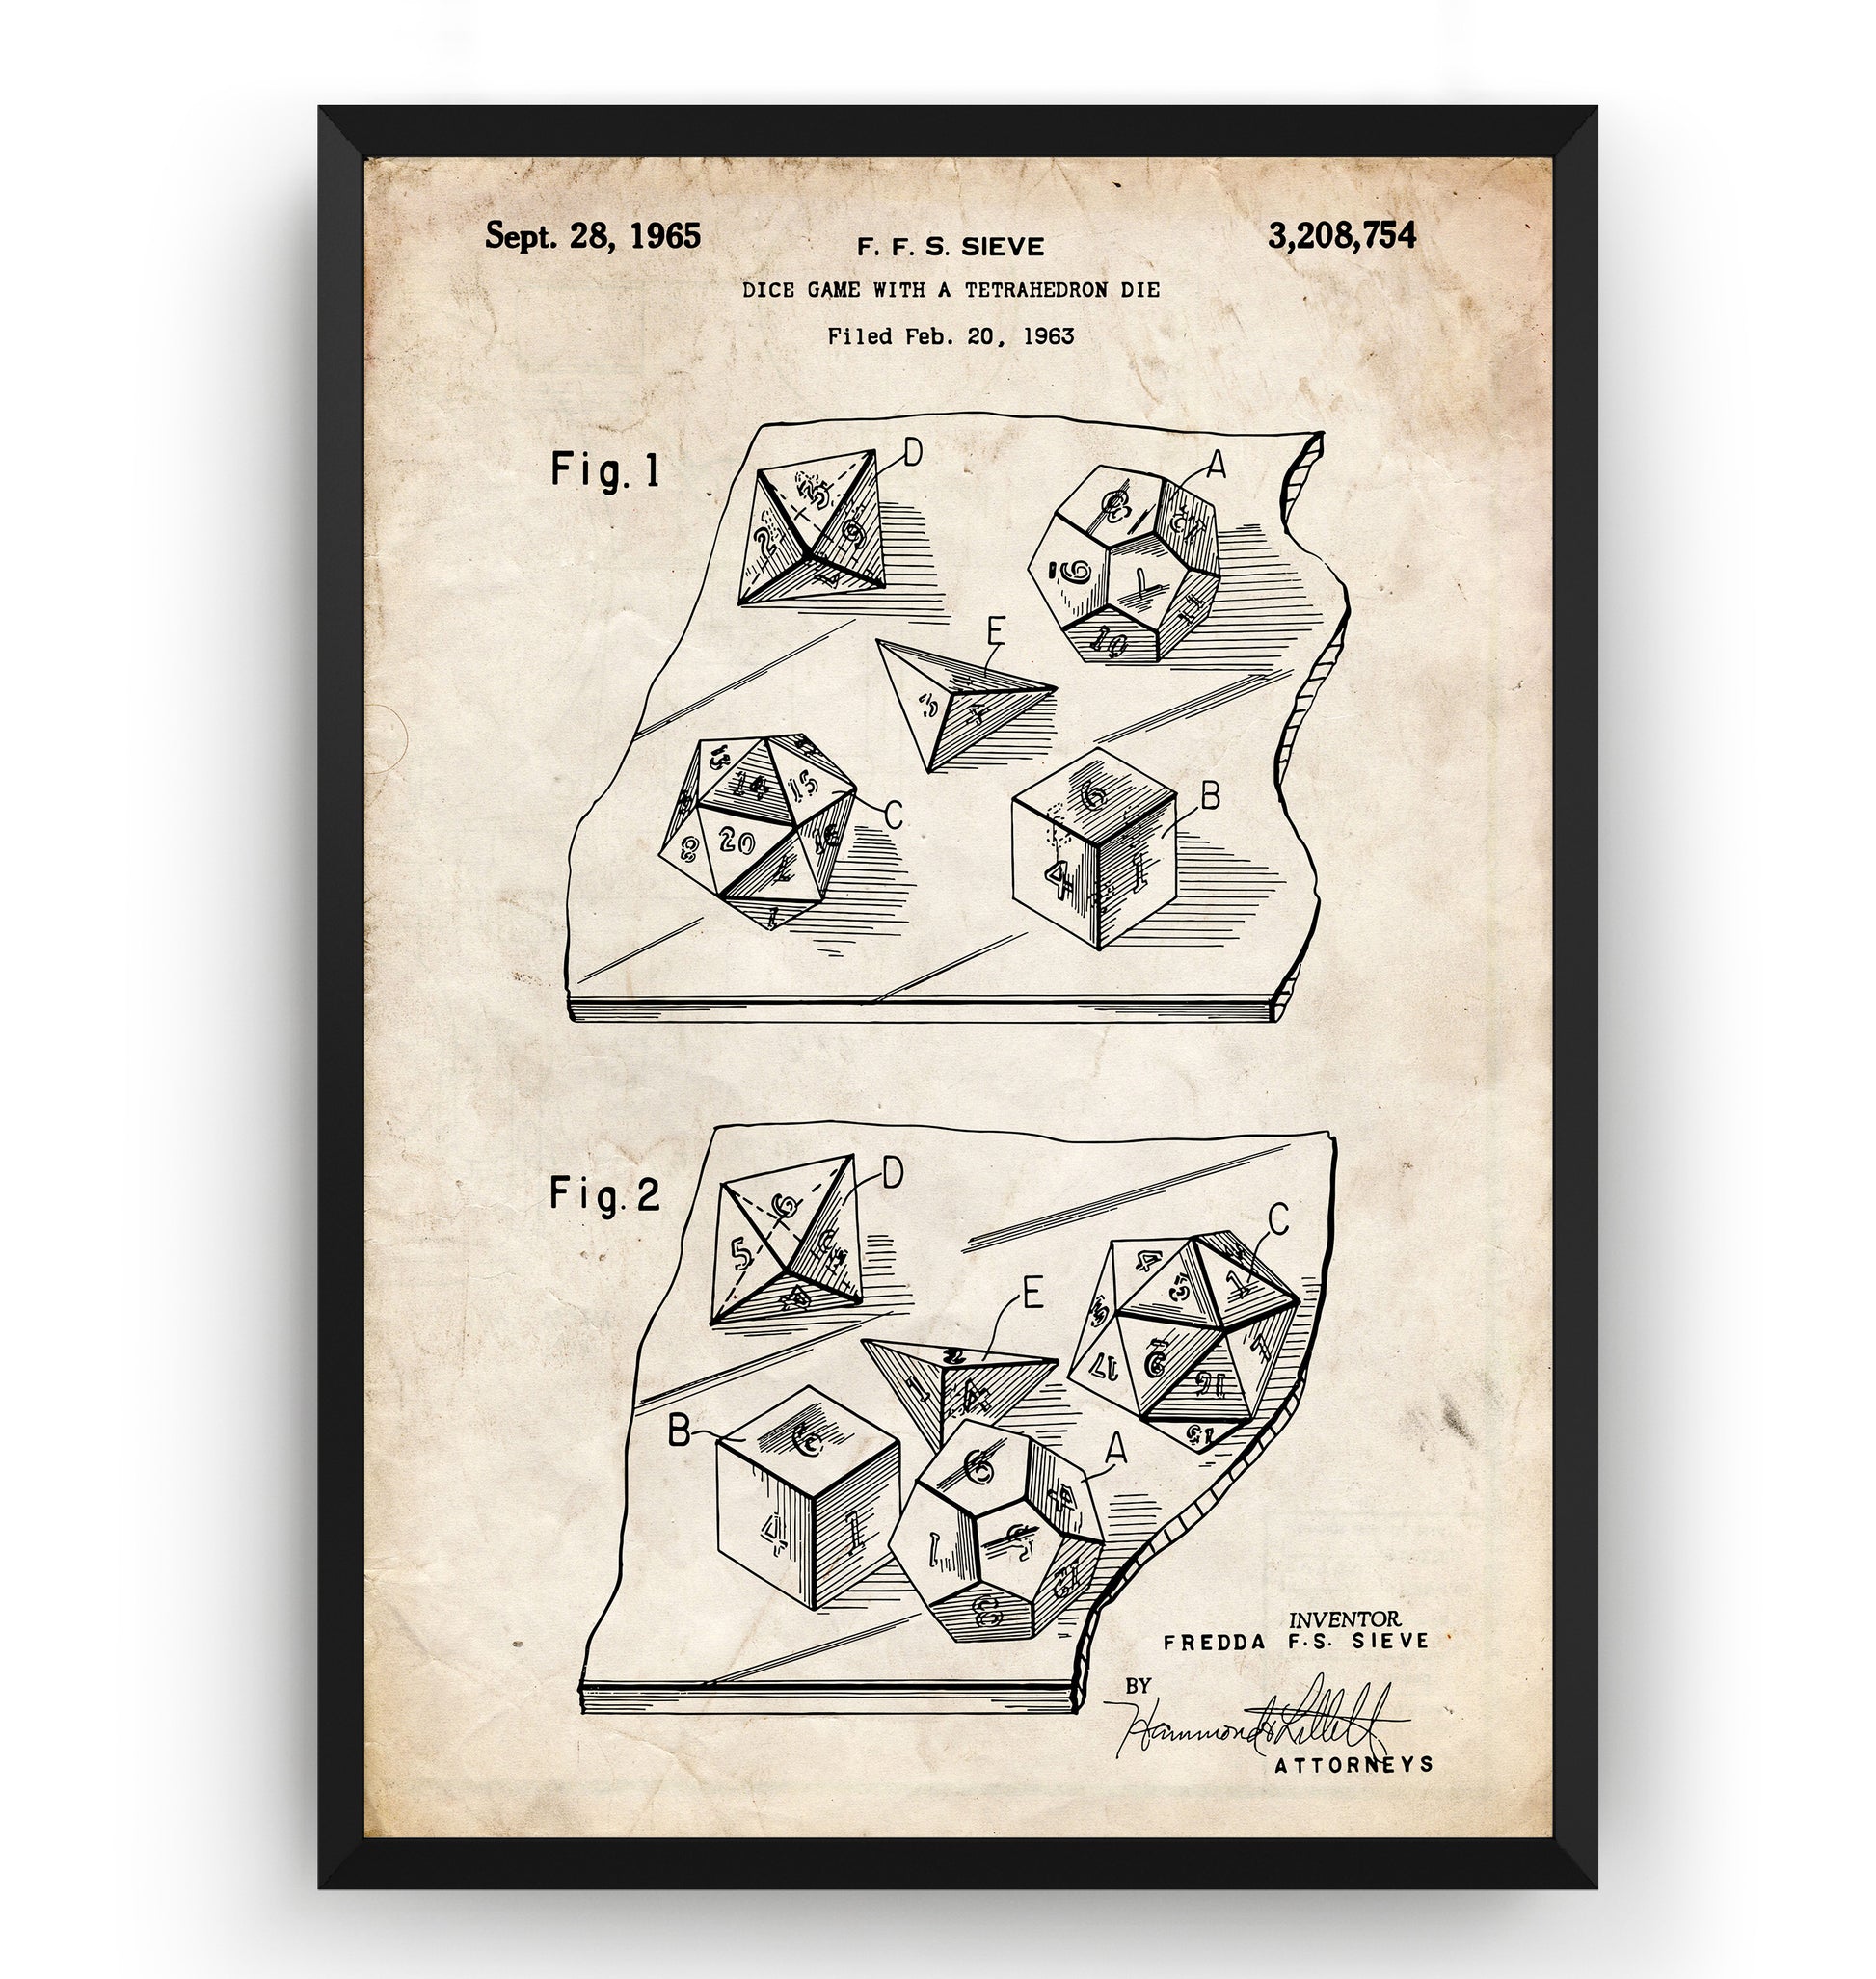 Dice Game With A Tetrahedron Dice 1963 Patent Print - Magic Posters